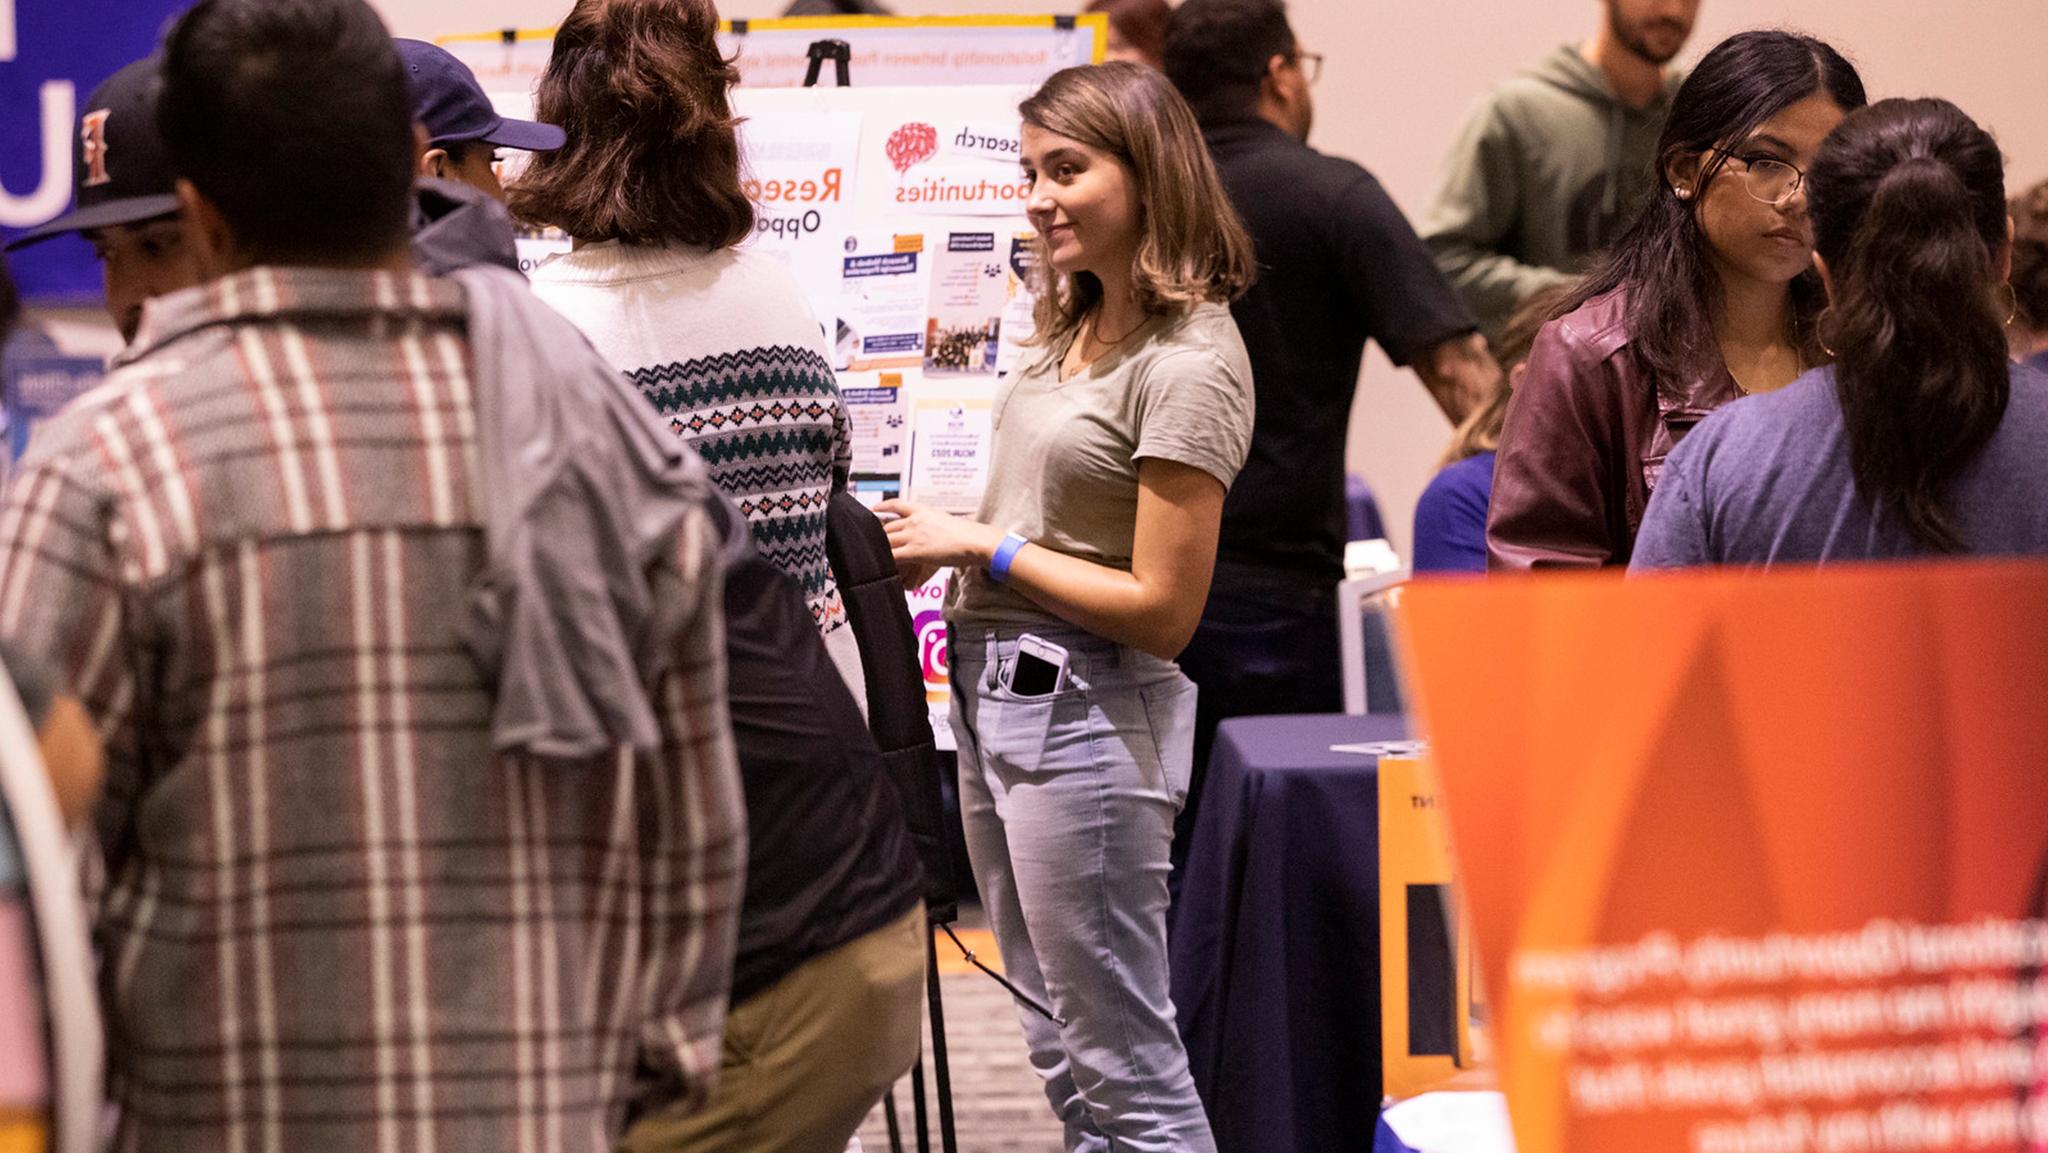 Student standing at resource fair